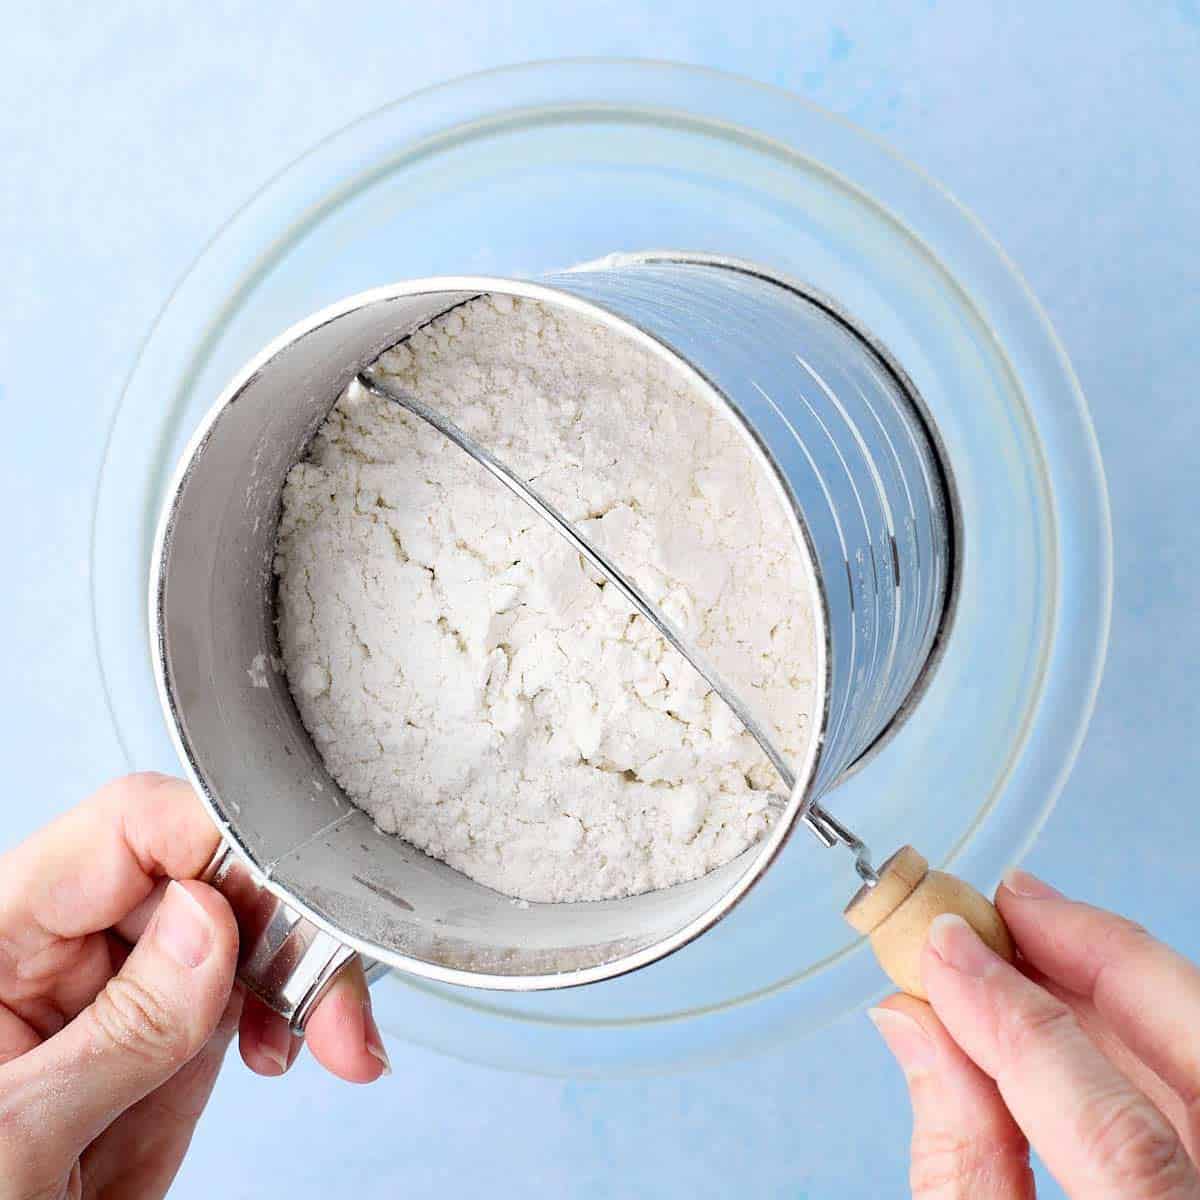 Sifting flour in a bowl.